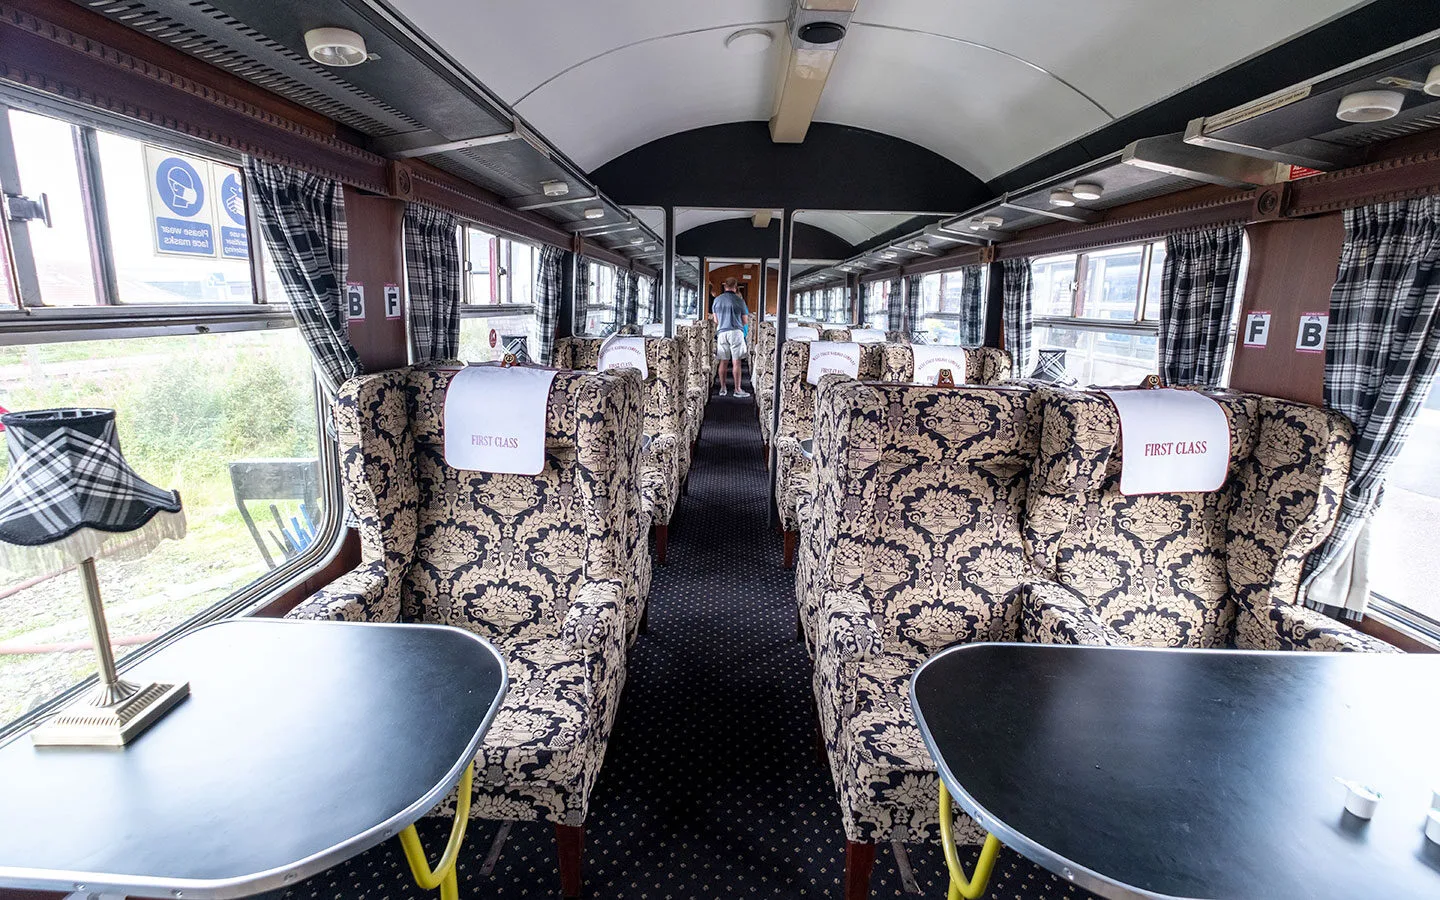 First Class carriage on the Jacobite steam train